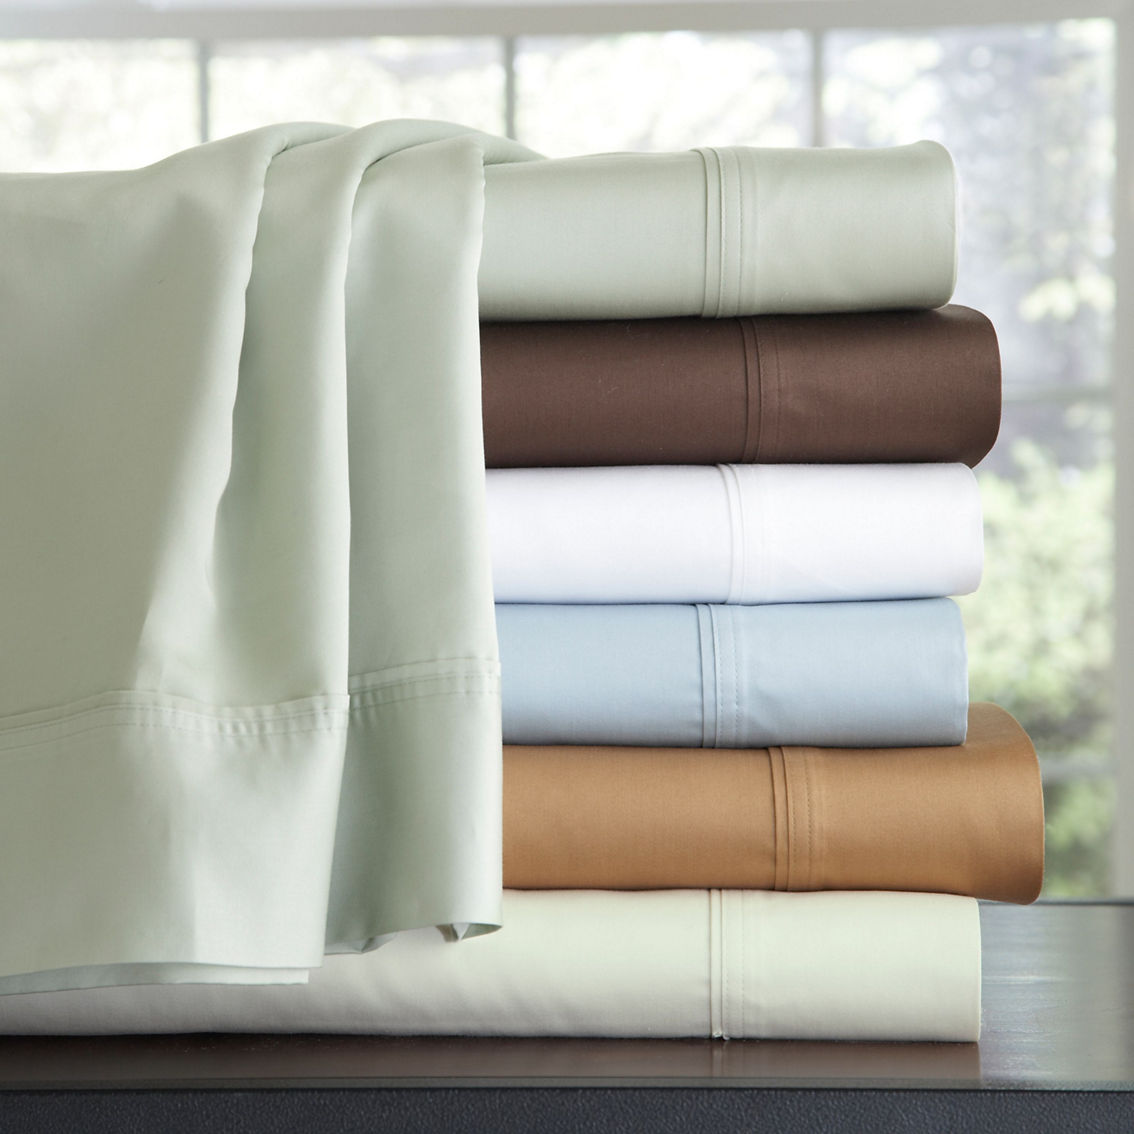 Pointehaven 500 Thread Count 100% Cotton Sheet Sets - Image 2 of 4